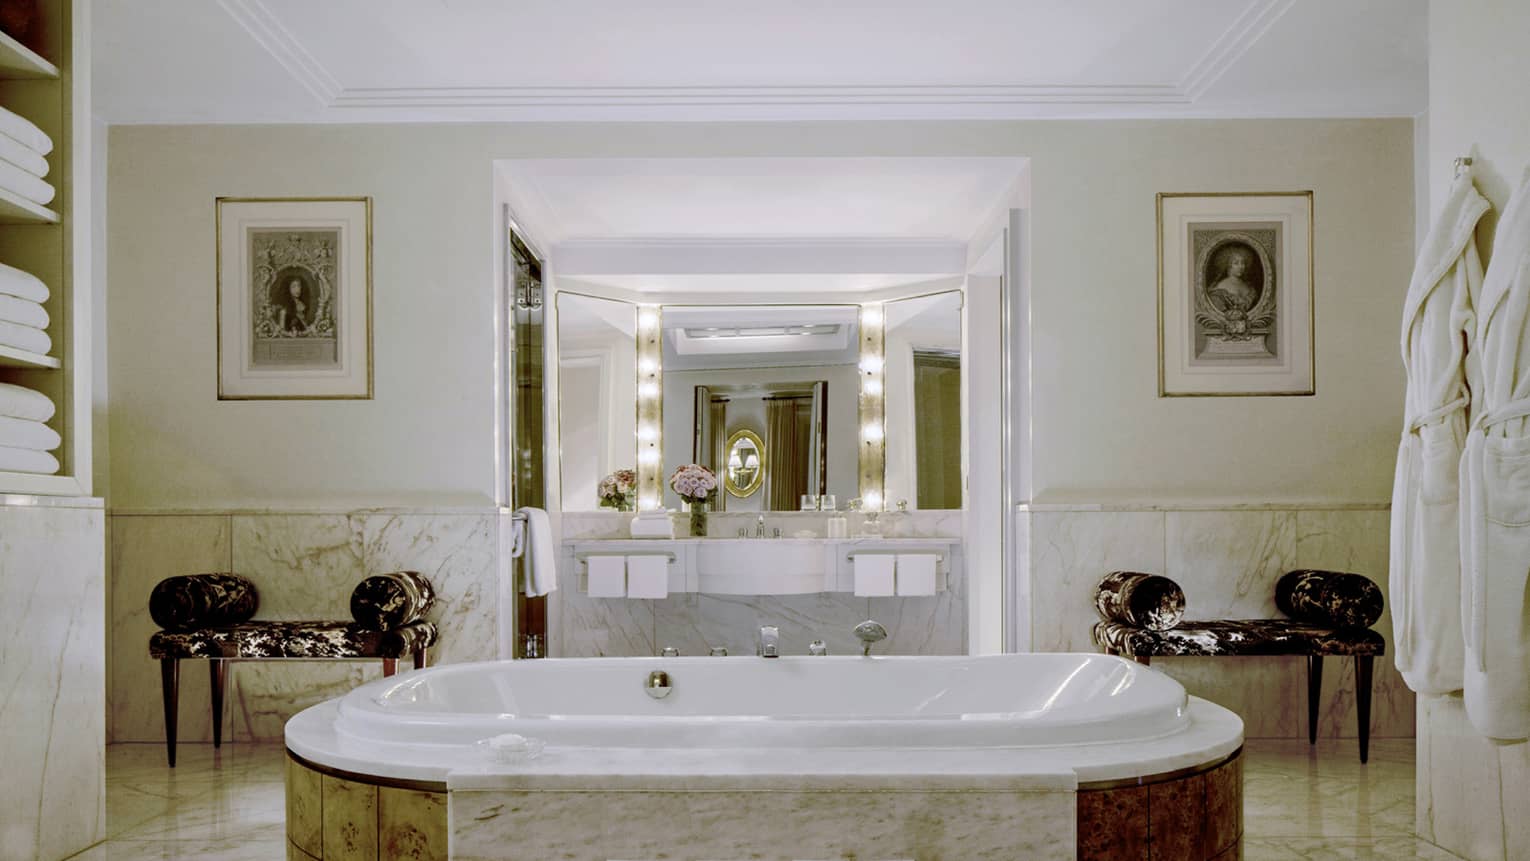 Full marble hotel bathroom with Hollywood lights over vanity, two benches and jetted tub in centre